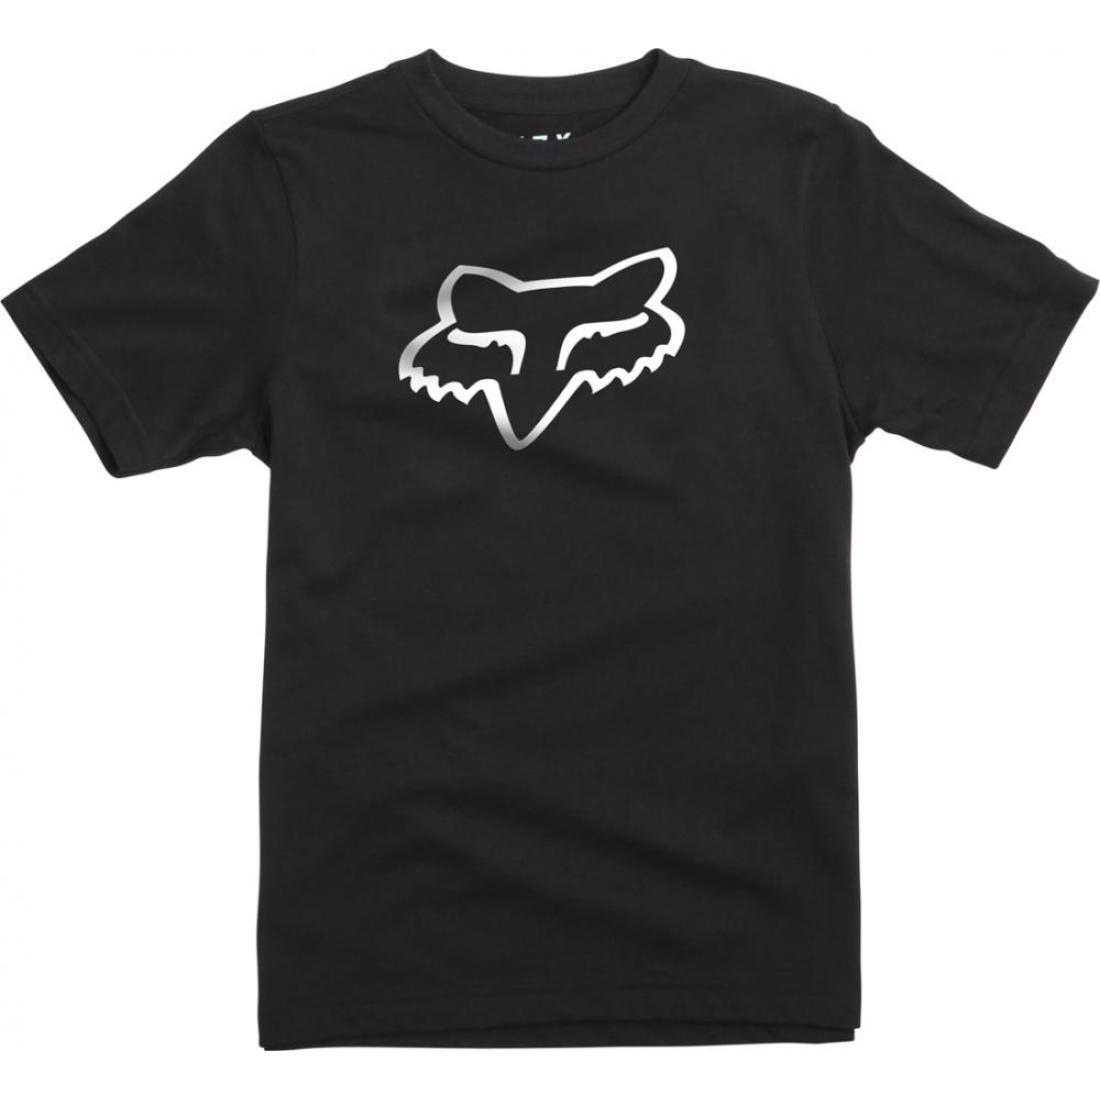 Youth Legacy SS Tee Black